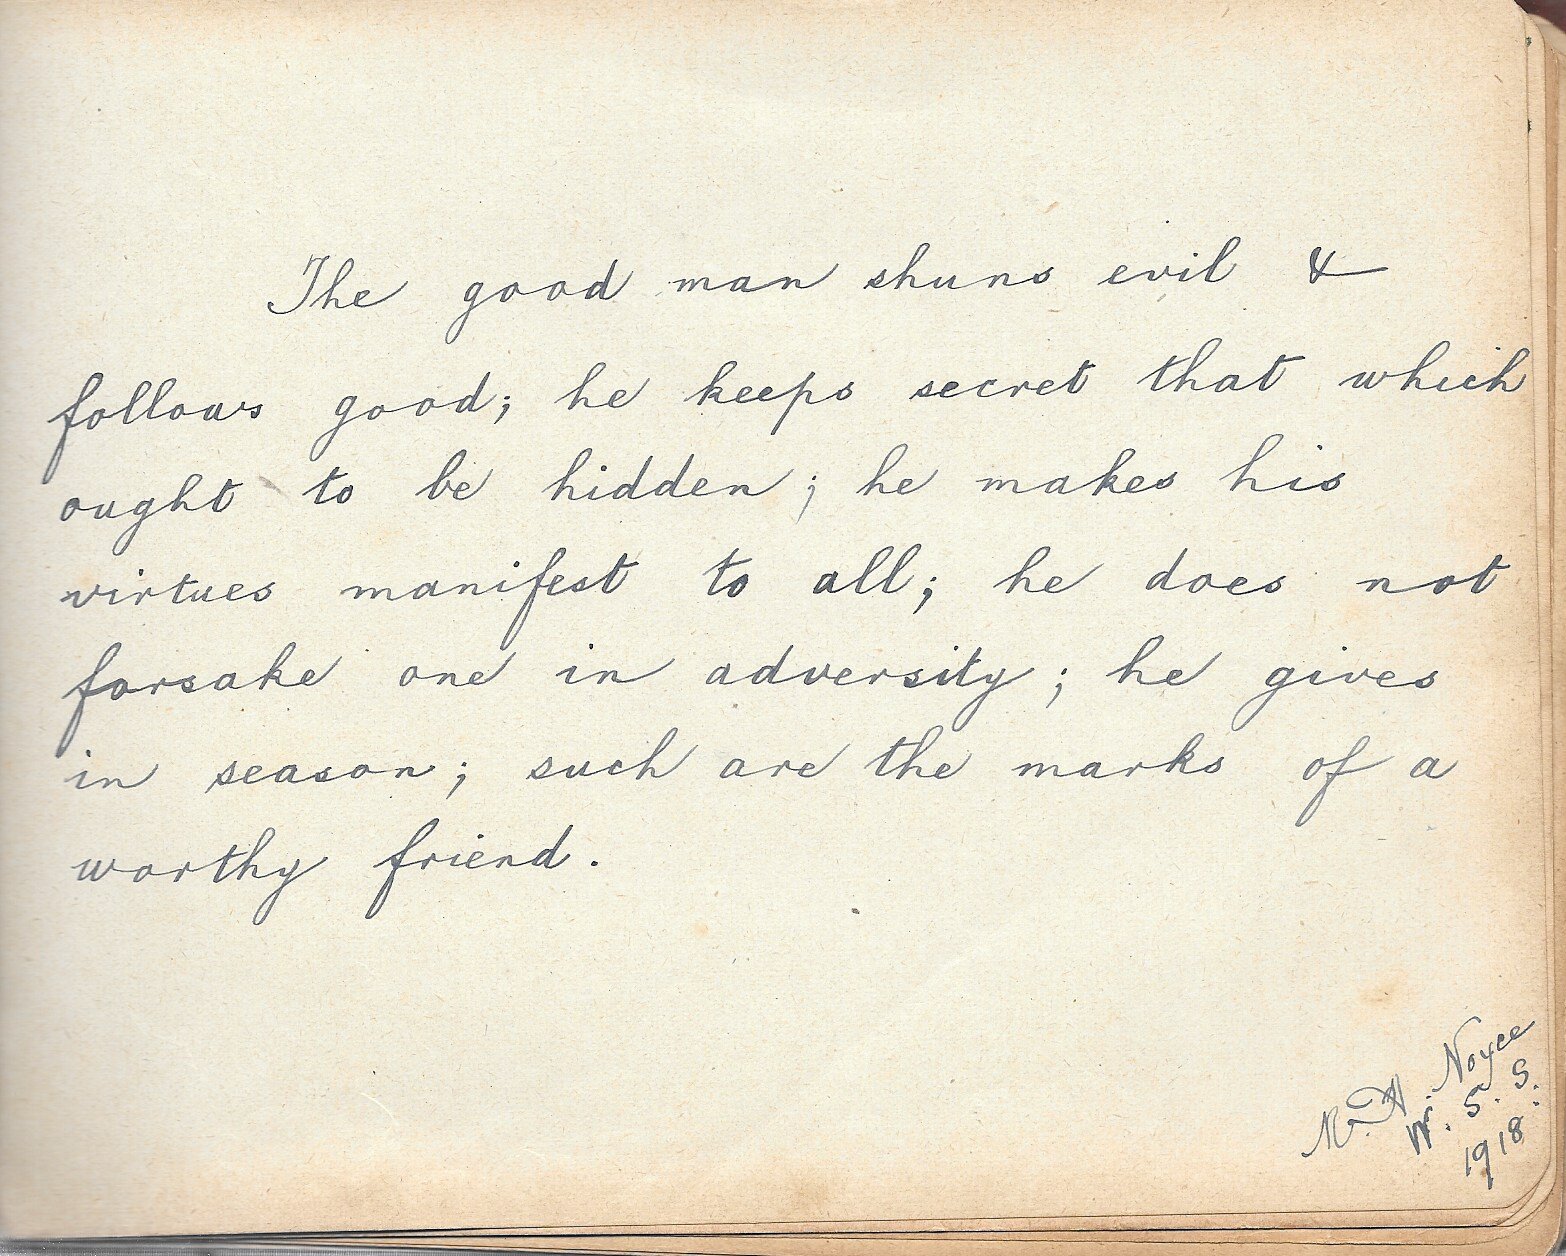  Extract from Miss Glover’s autograph book 